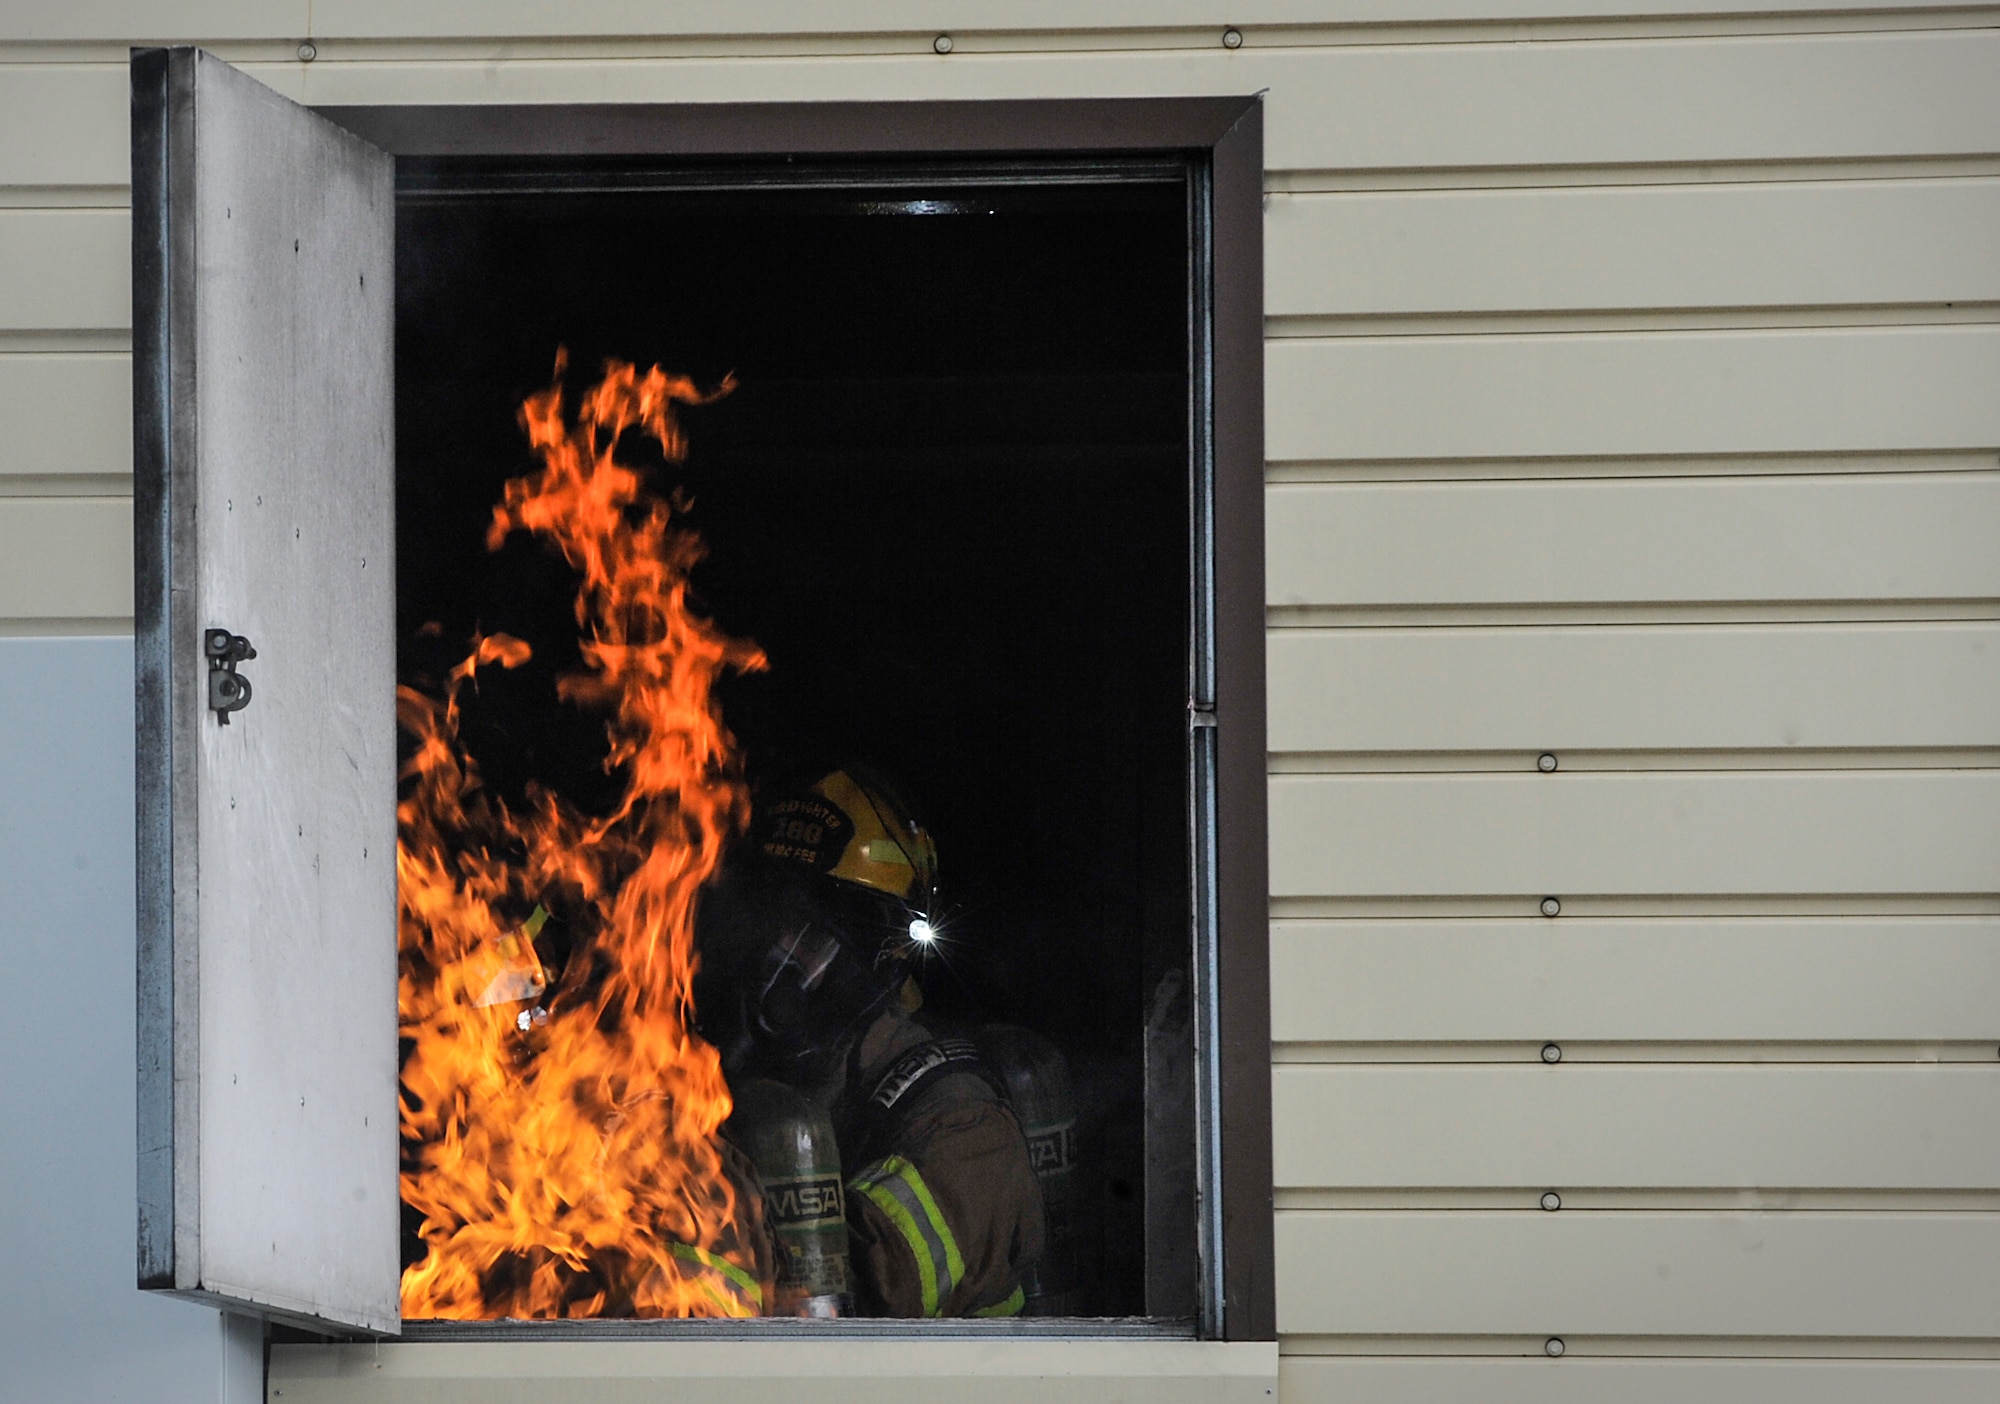 Airmen from the 86th Civil Engineer Squadron put out a fire during a biannual training exercise June 2, 2016, at Ramstein Air Base, Germany. These exercises prepare Airmen for real-world fires and emergencies. (U.S. Air Force photo/Senior Airman Larissa Greatwood)